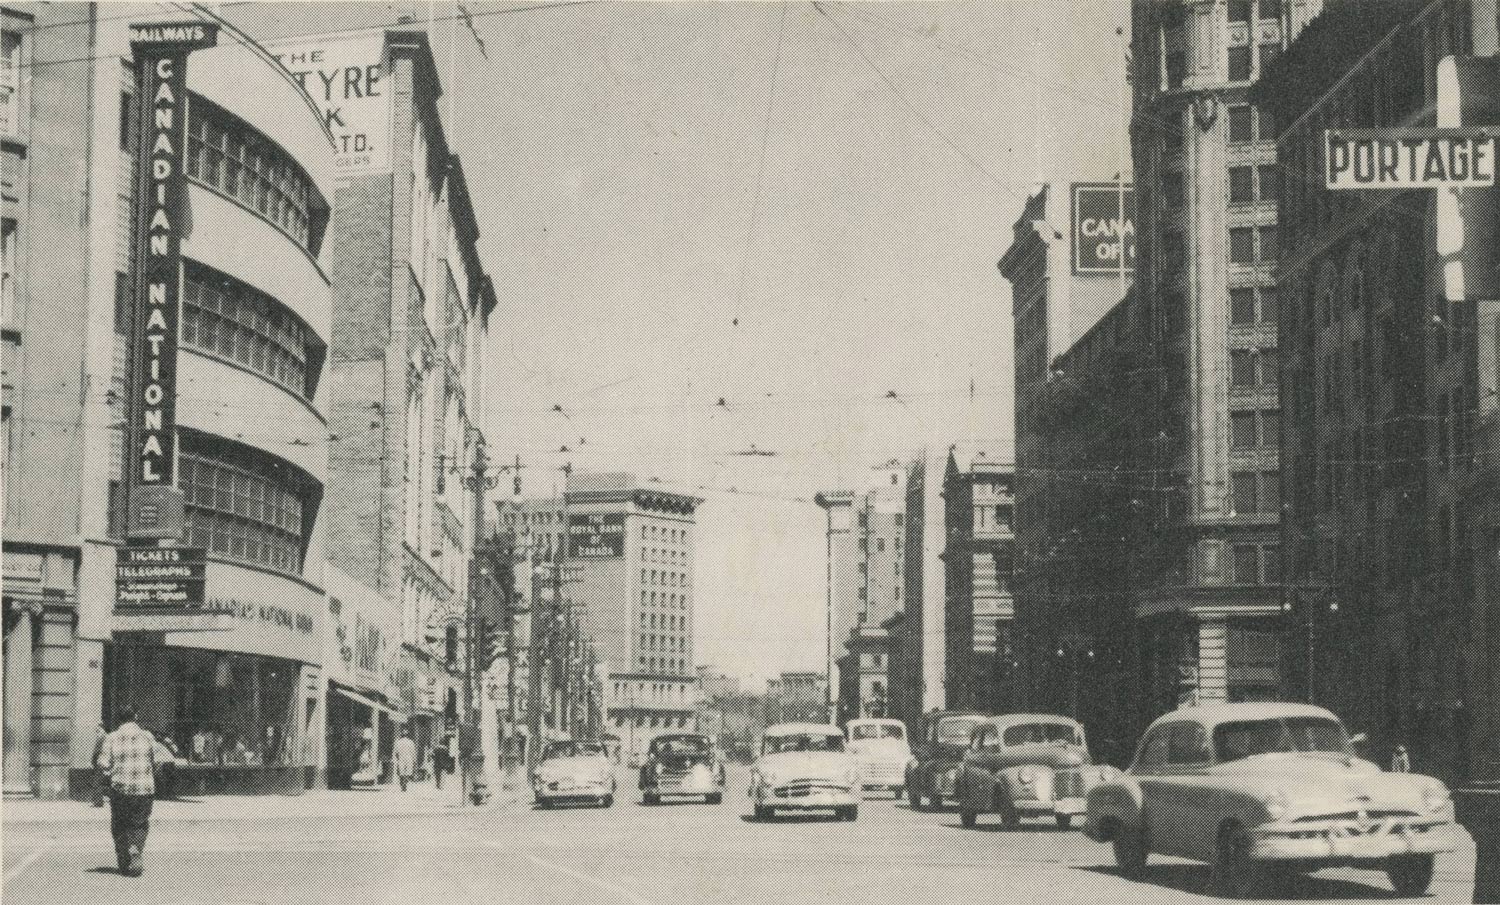 A street view of Winnipeg, Manitoba in the 1950’s